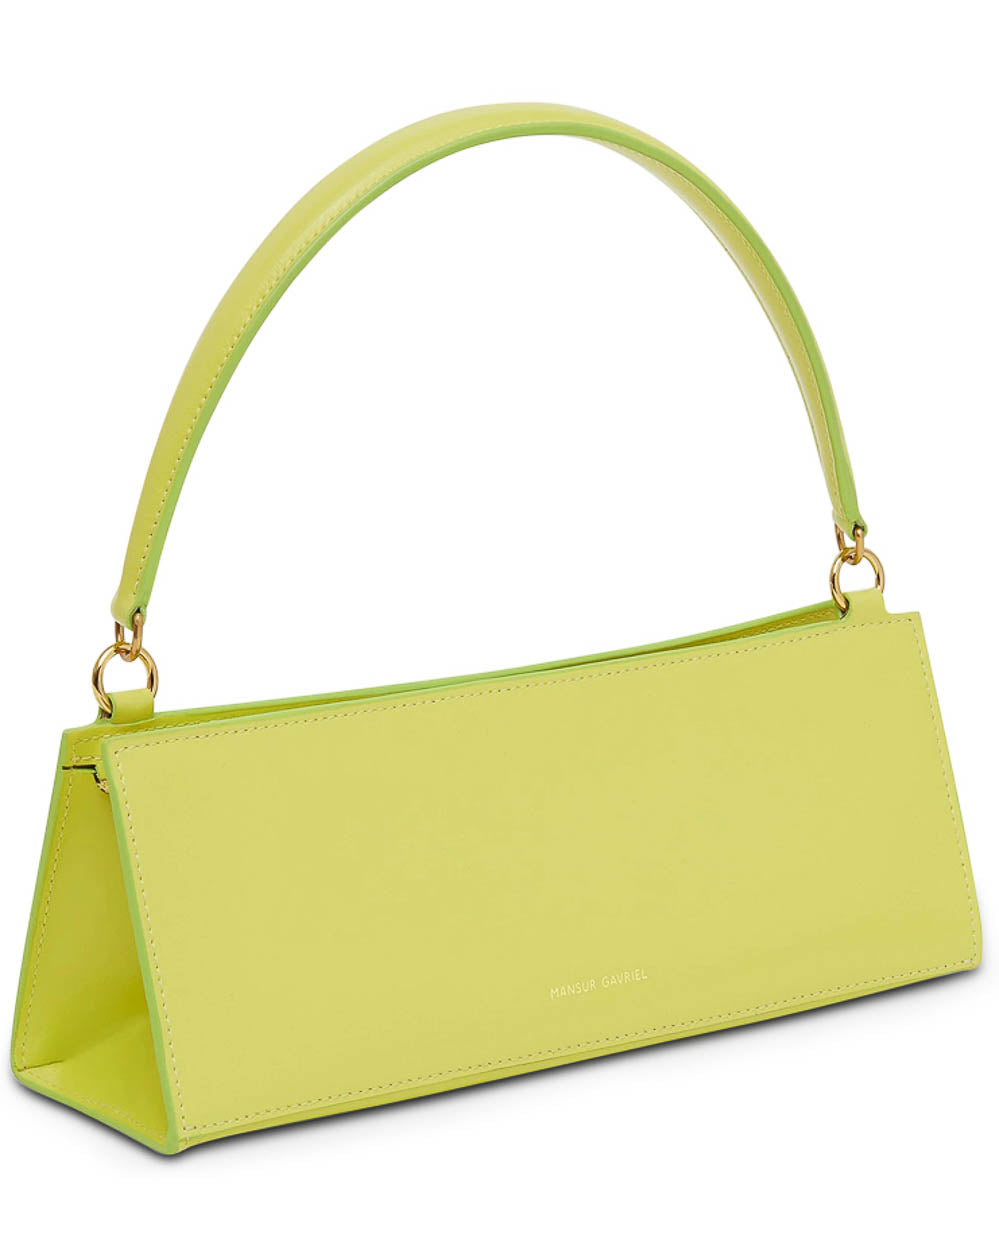 Pencil Bag in Lime